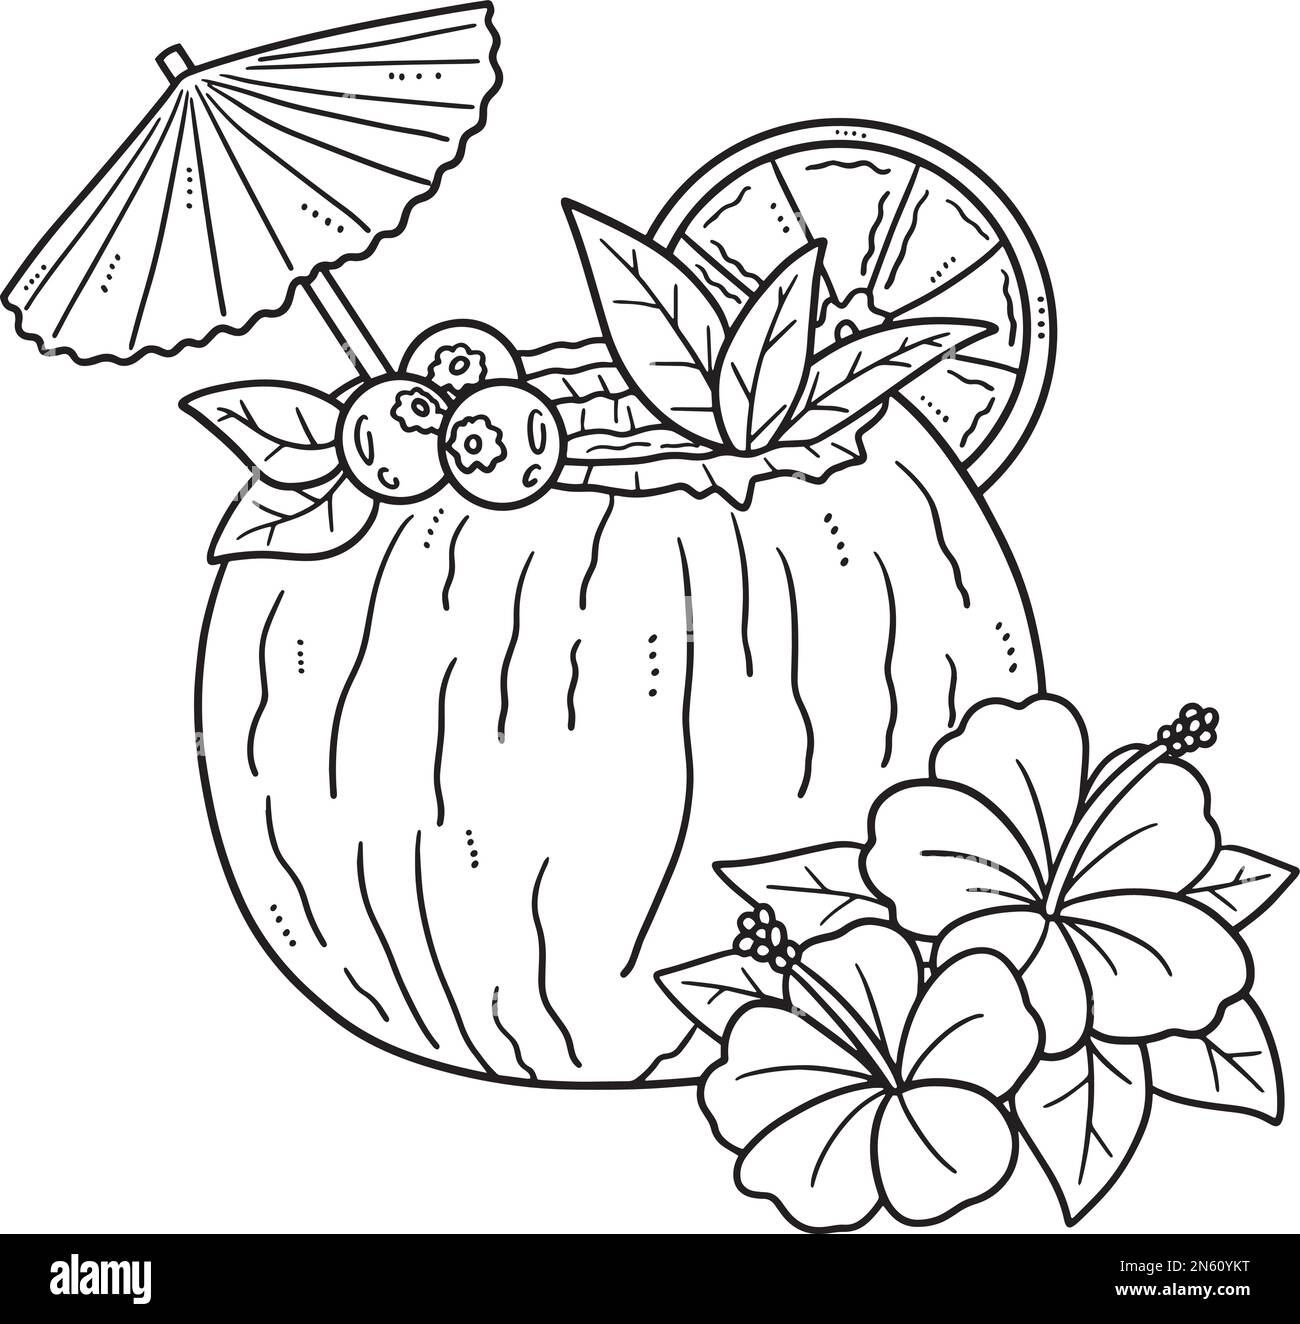 Coconut cocktail isolated coloring page for kids stock vector image art